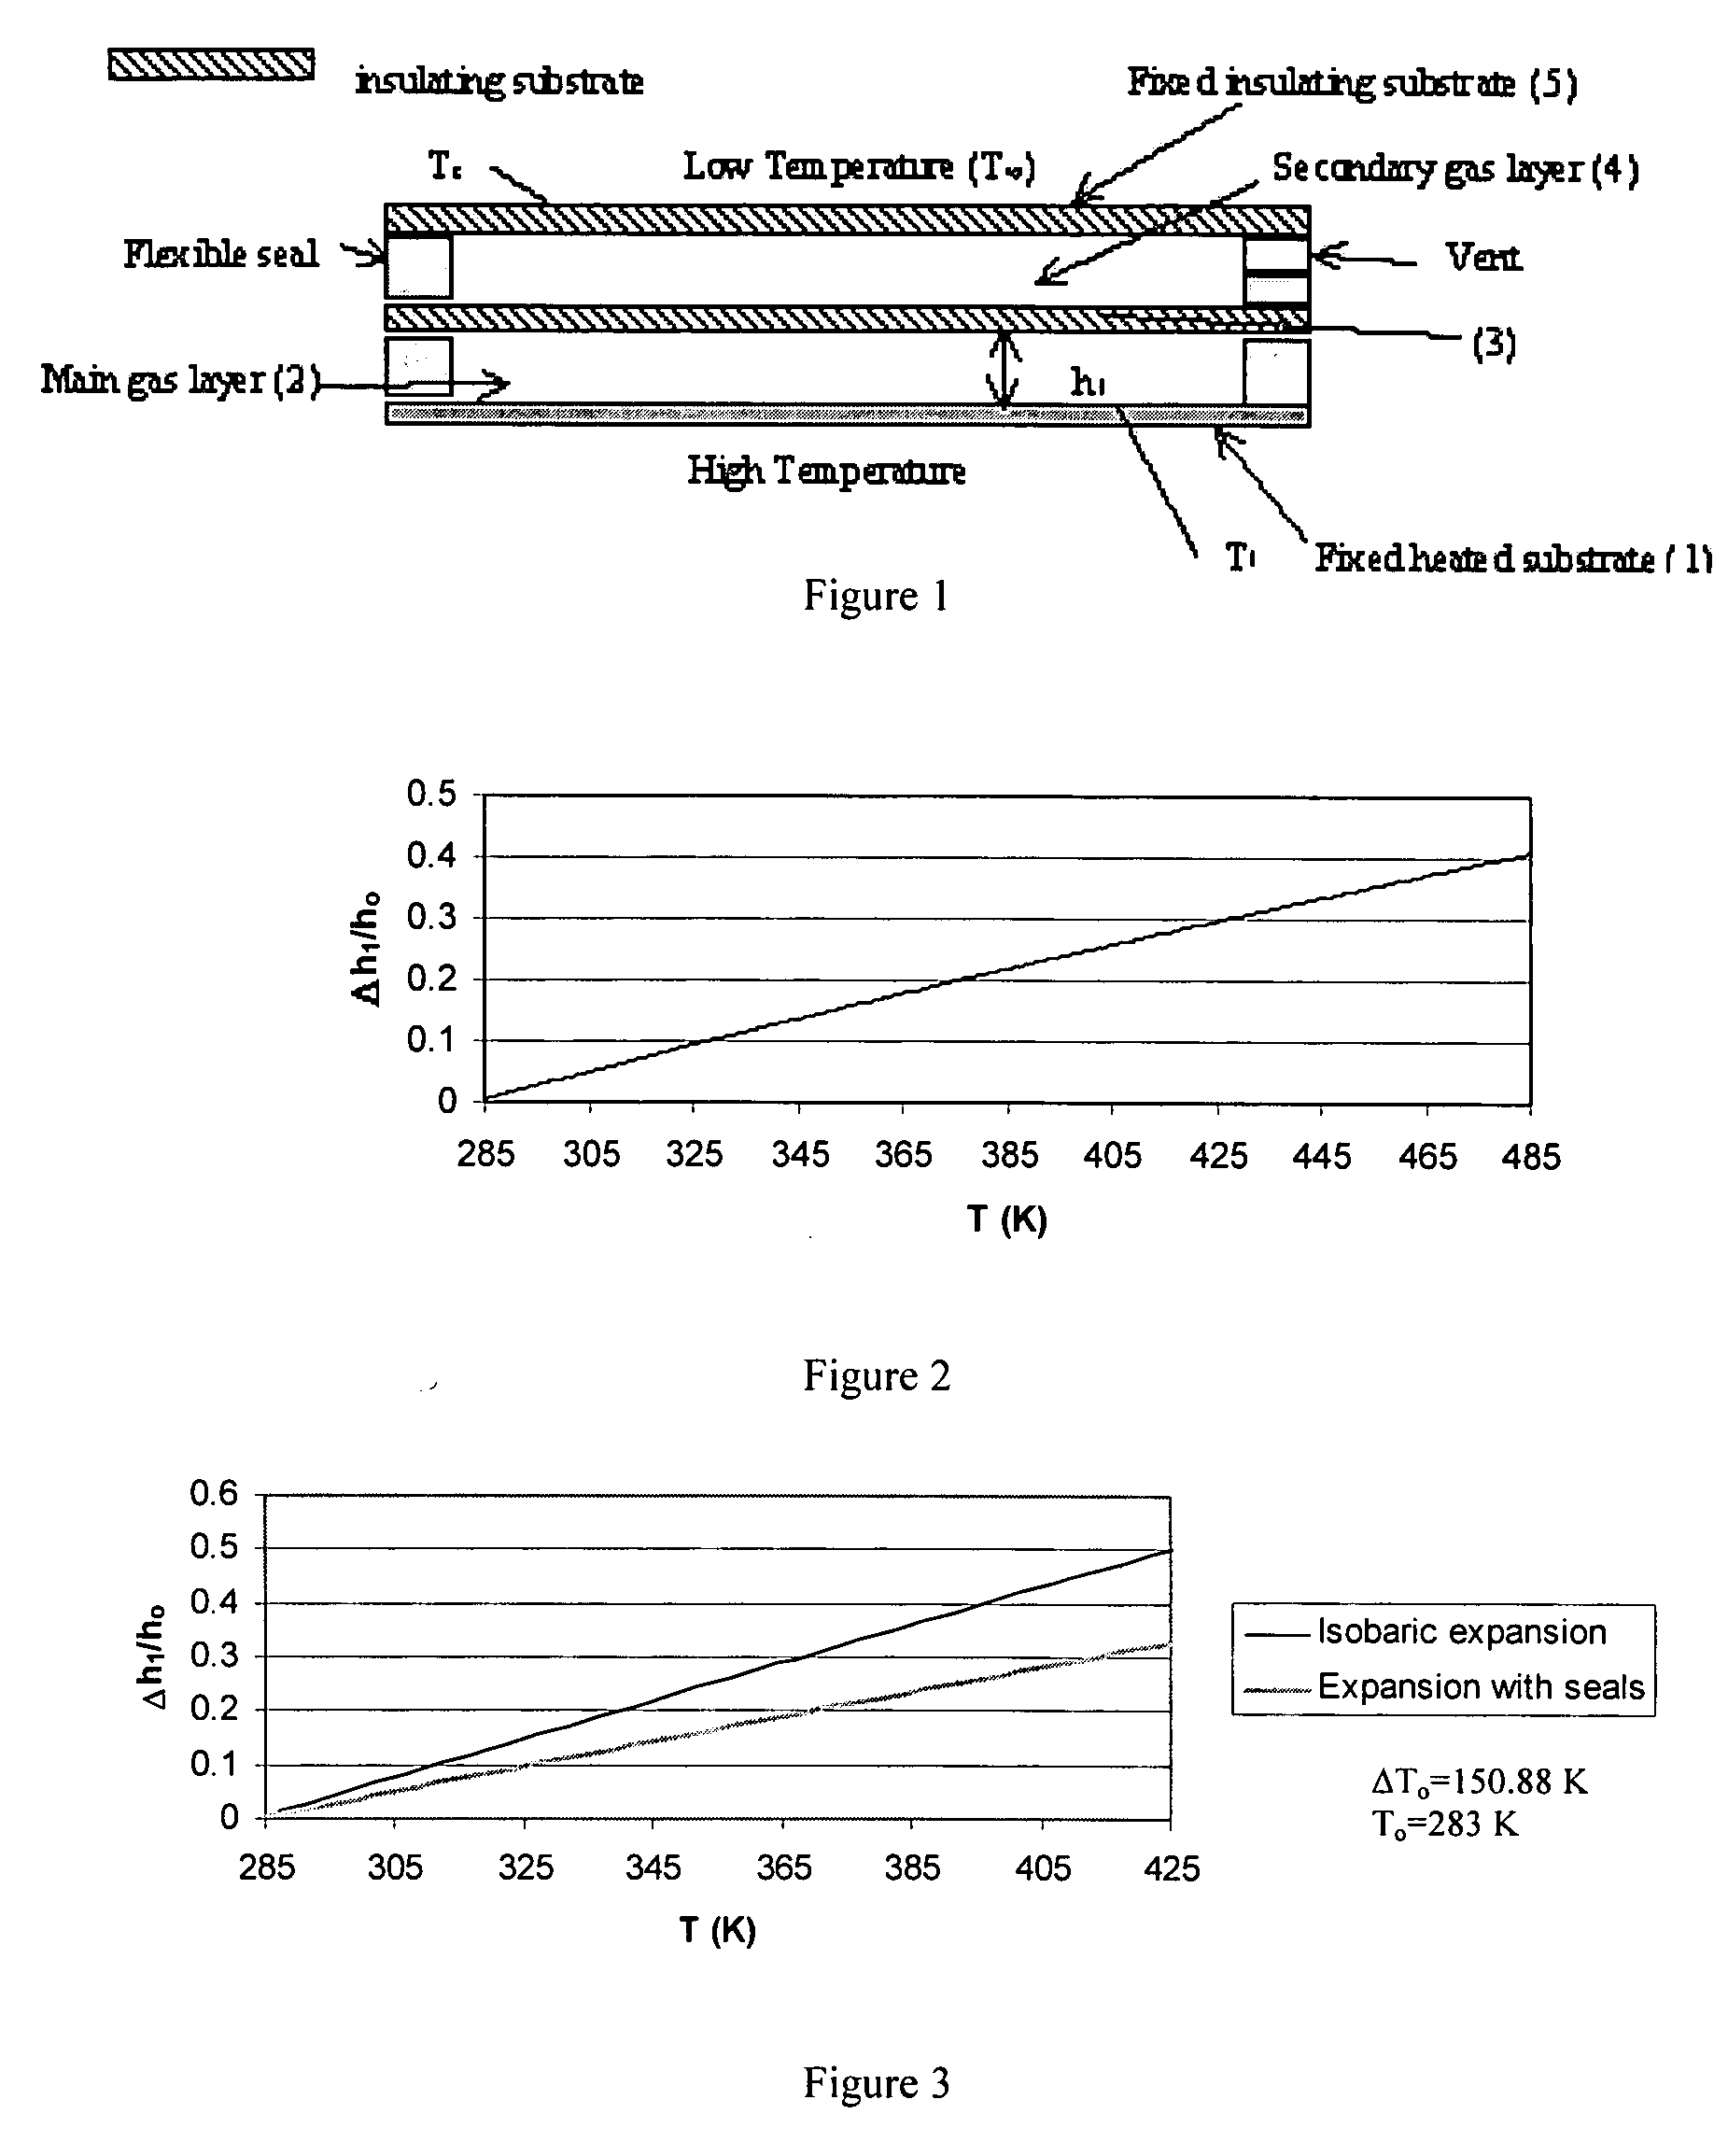 Methods and devices comprising flexible seals, flexible microchannels, or both for modulating or controlling flow and heat